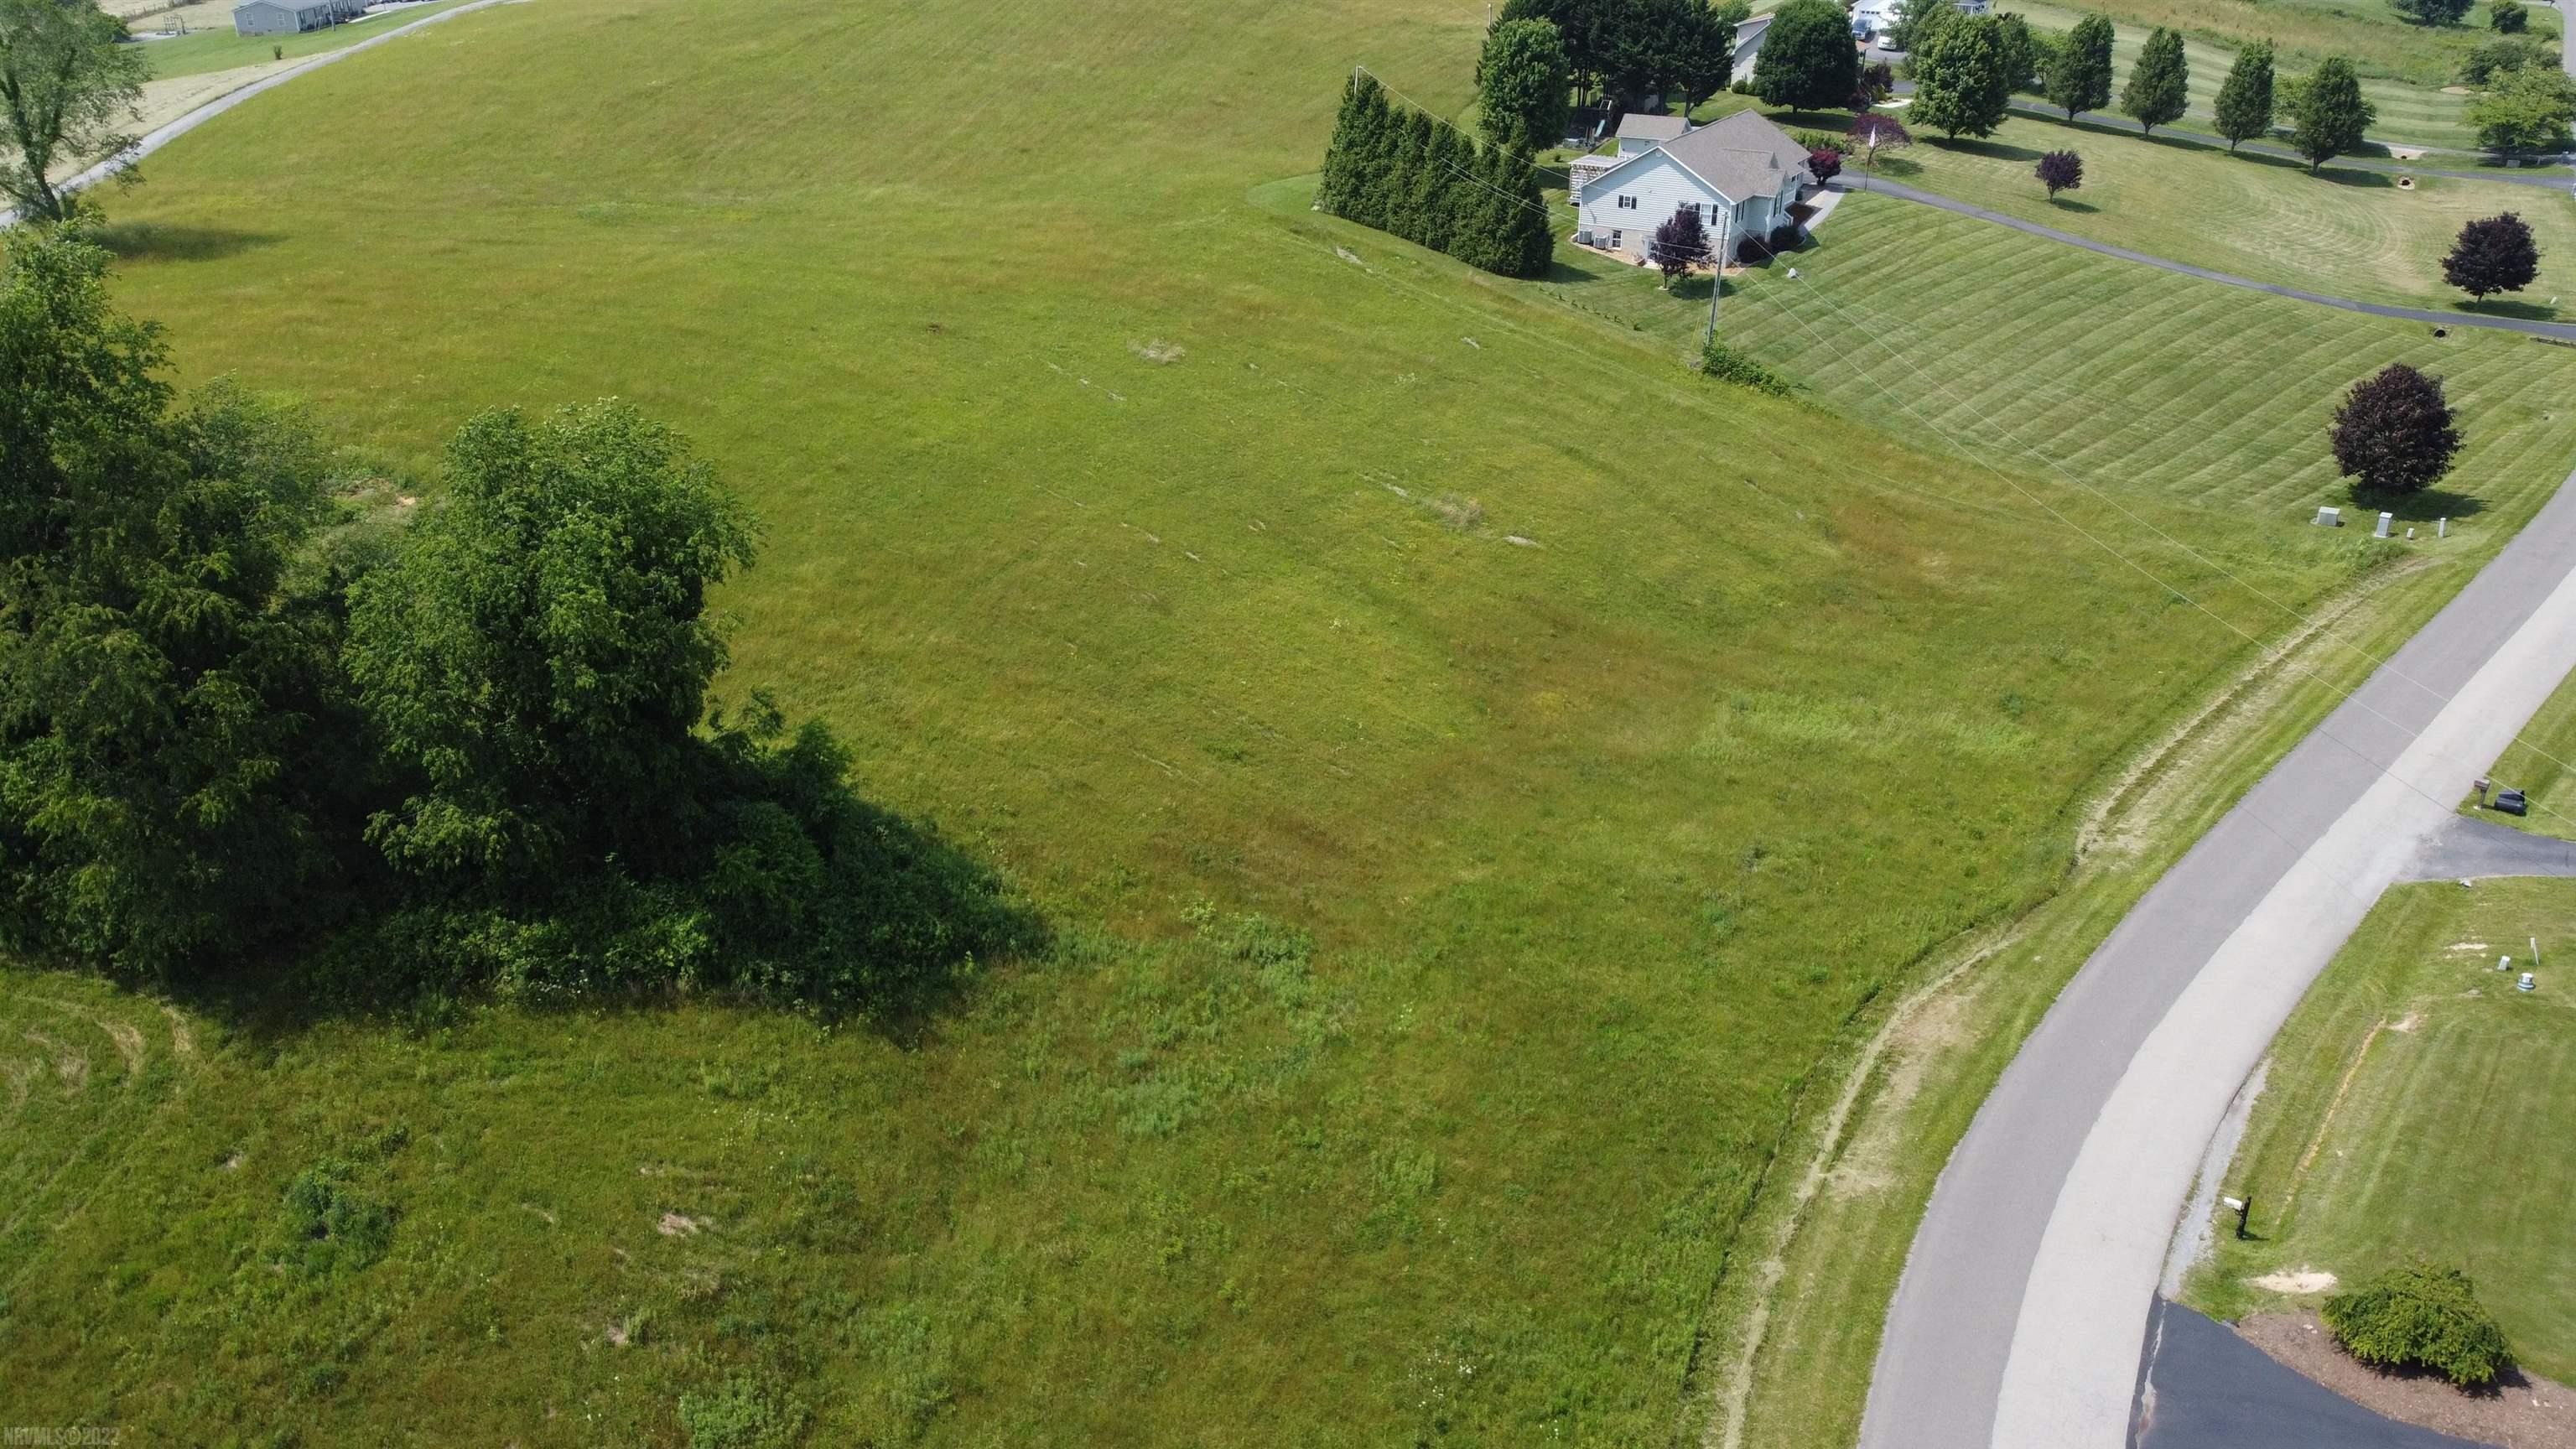 Land for sale ready for your custom new home in Grandview Subdivision. This tract of land is located just minutes from Dublin and Pulaski.